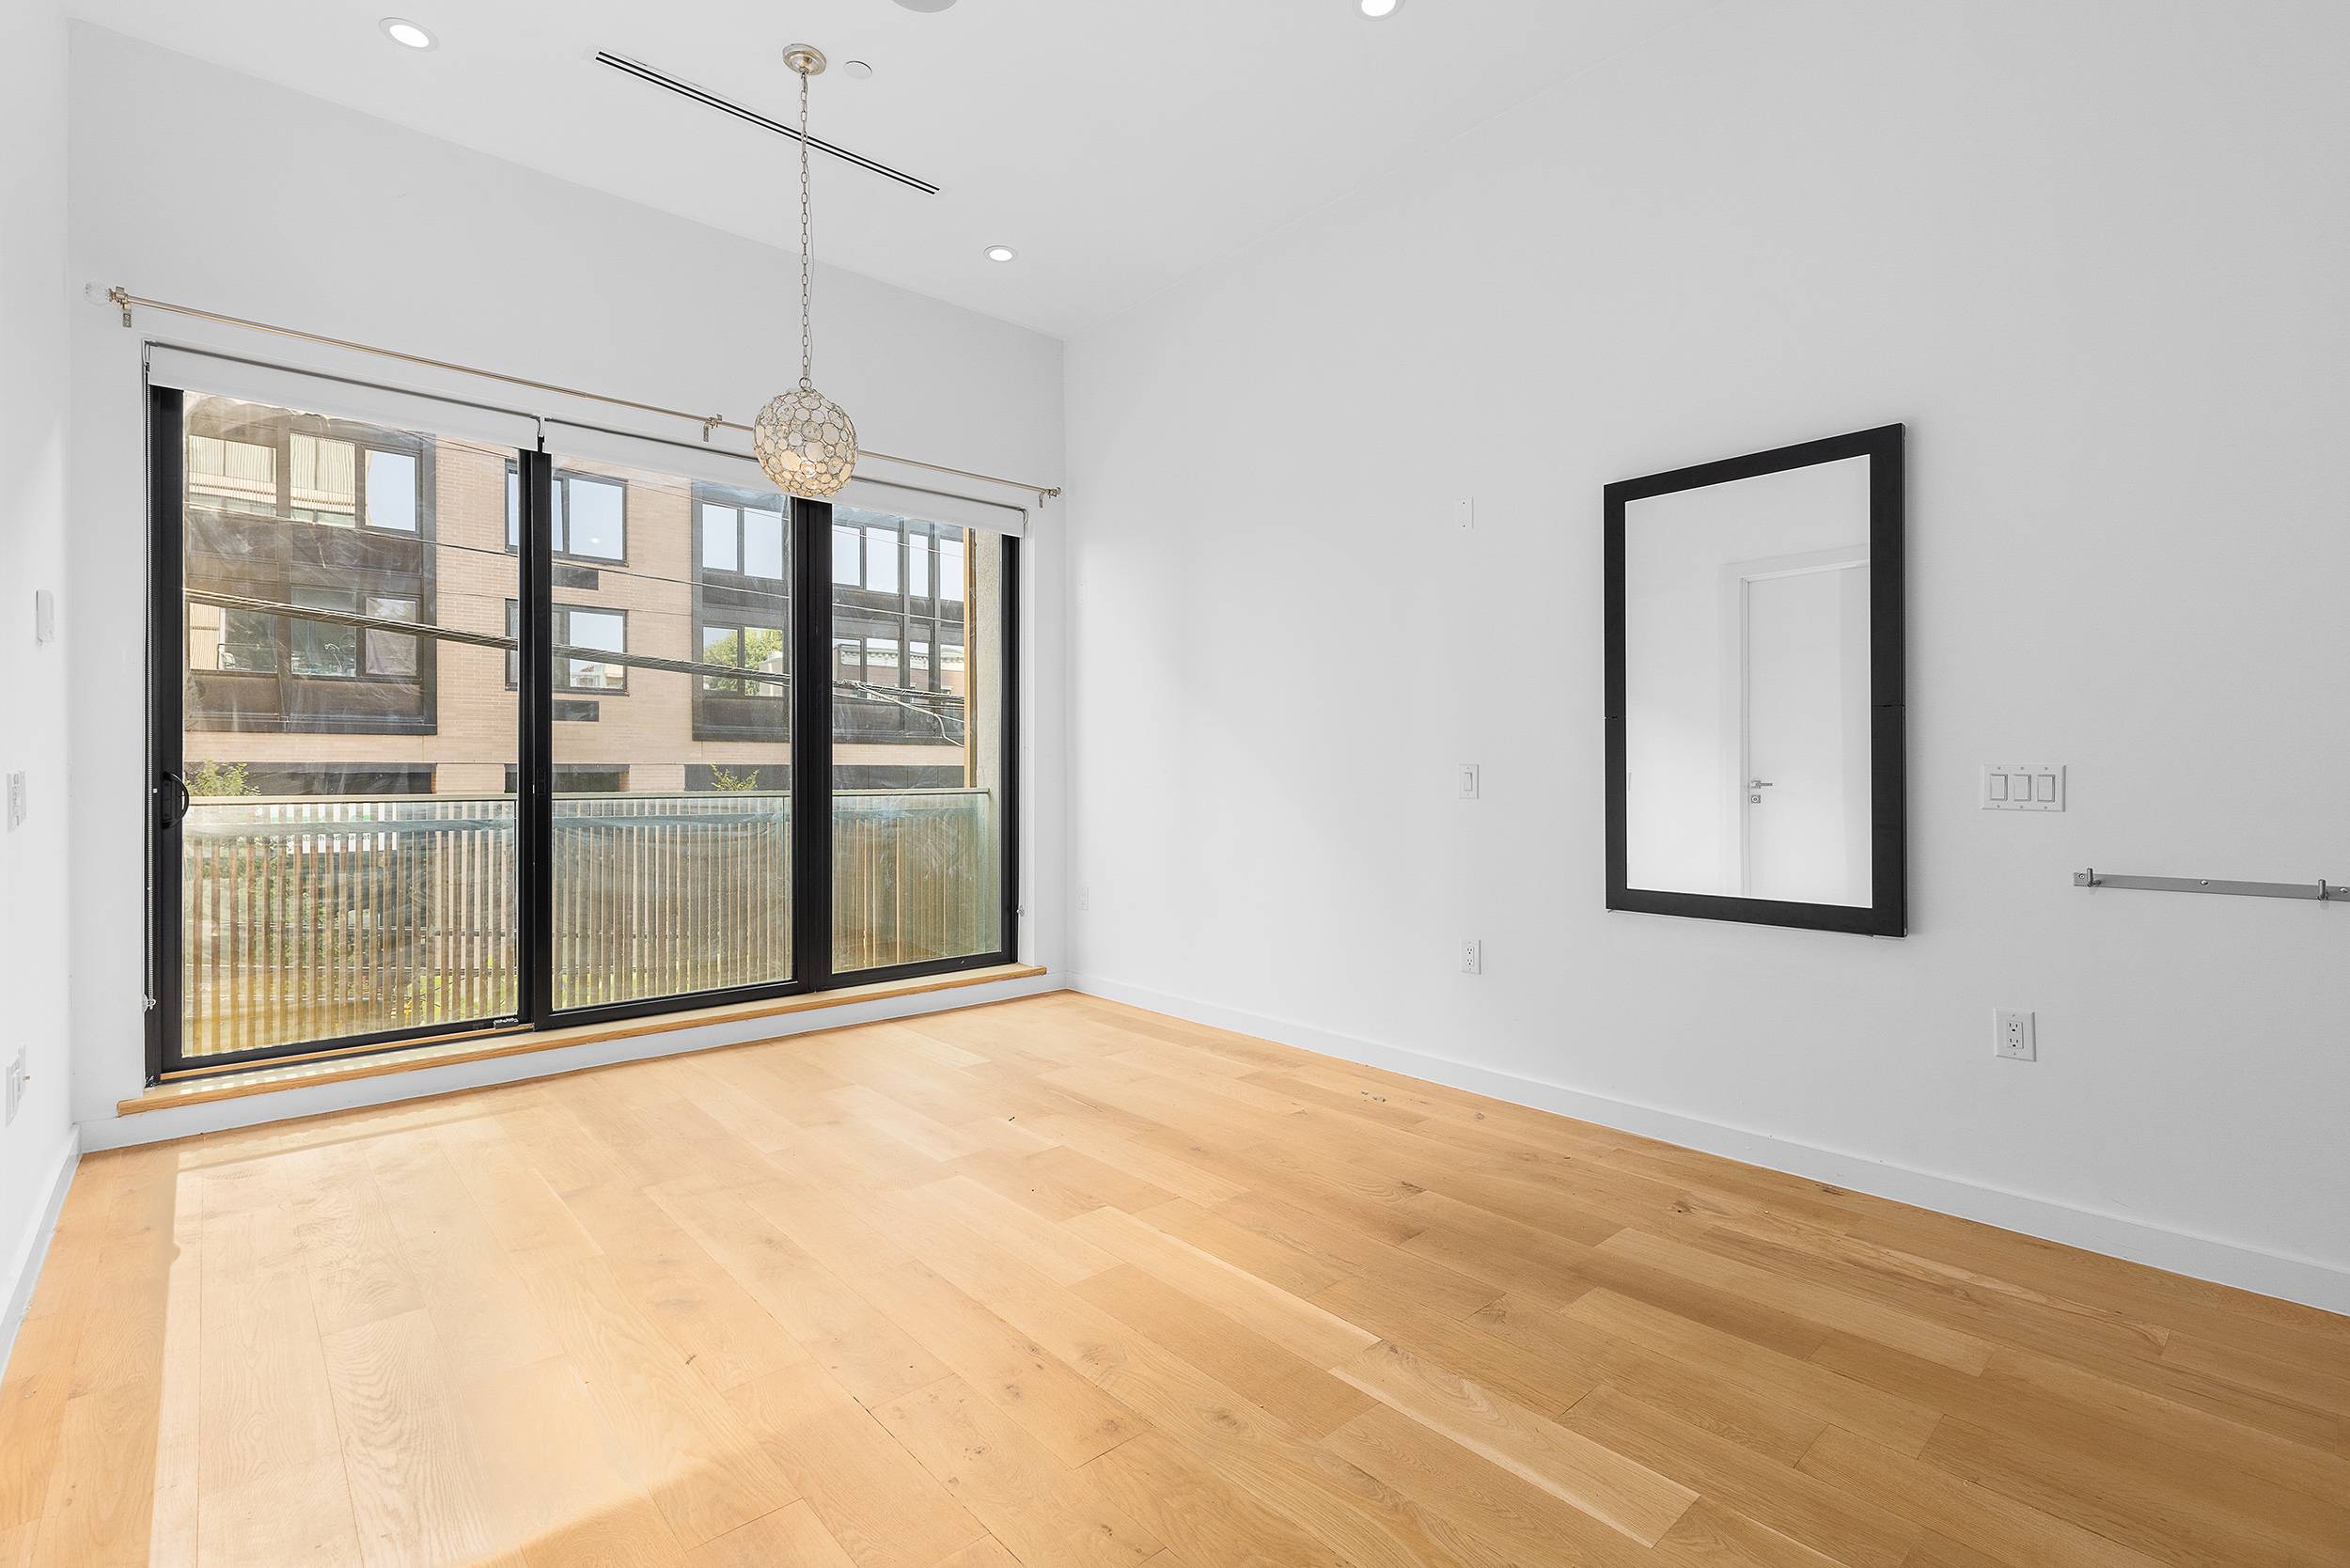 Nestled in a prime location between India and Huron Streets, apartment 2A at 148 West Street in bustling Greenpoint, Brooklyn enjoys a coveted spot just opposite the Greenpoint ferry stop ...